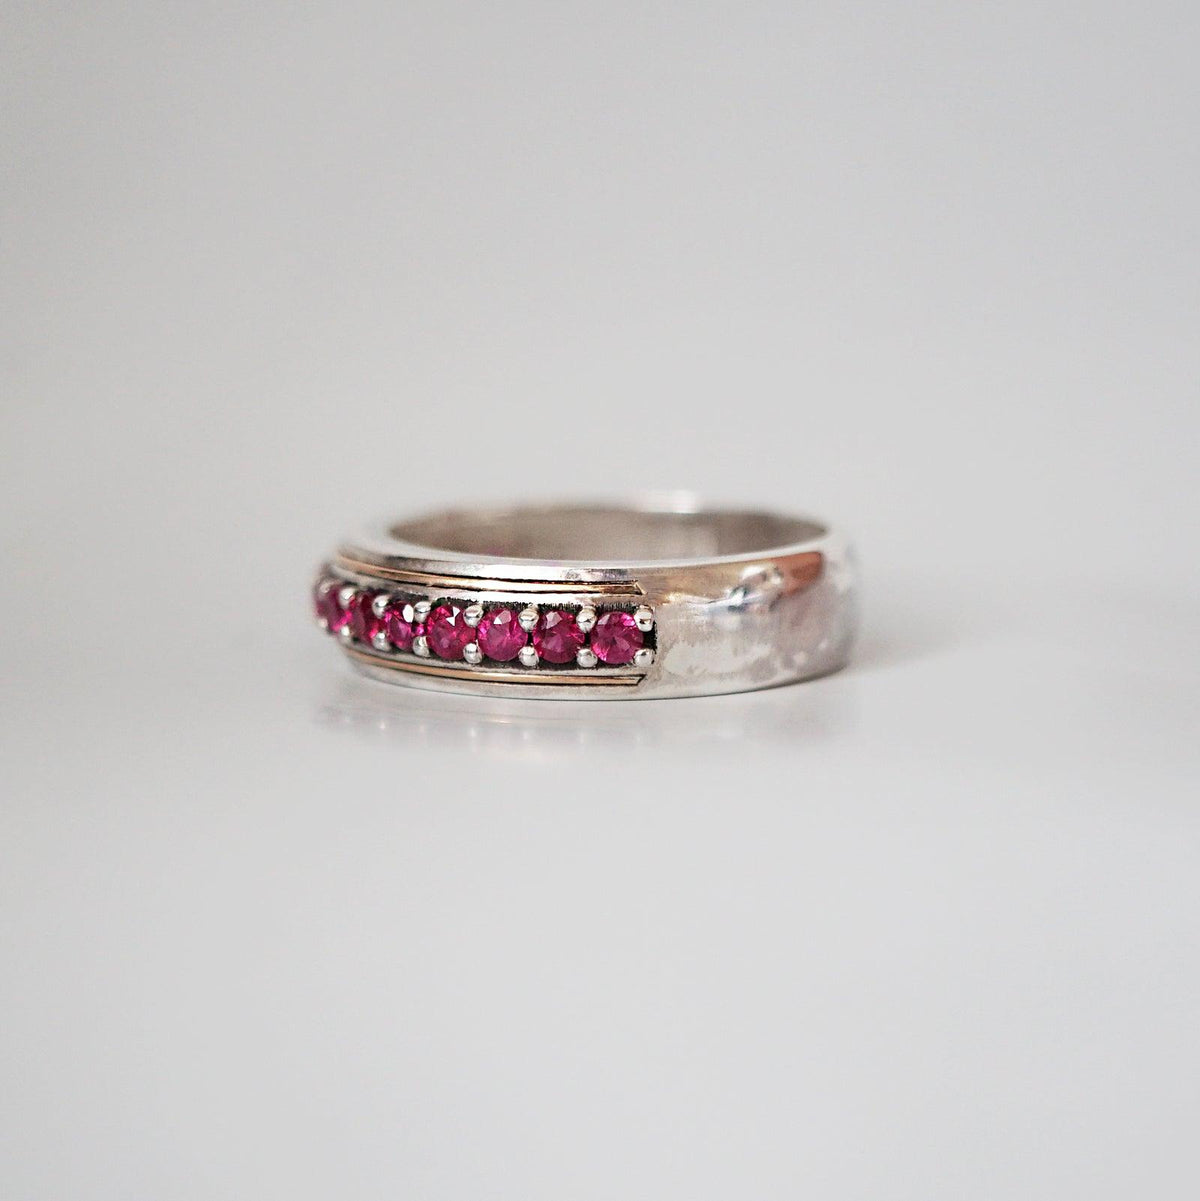 Silver/22K Gold Inlay Ruby Ring, 5mm - Tippy Taste Jewelry